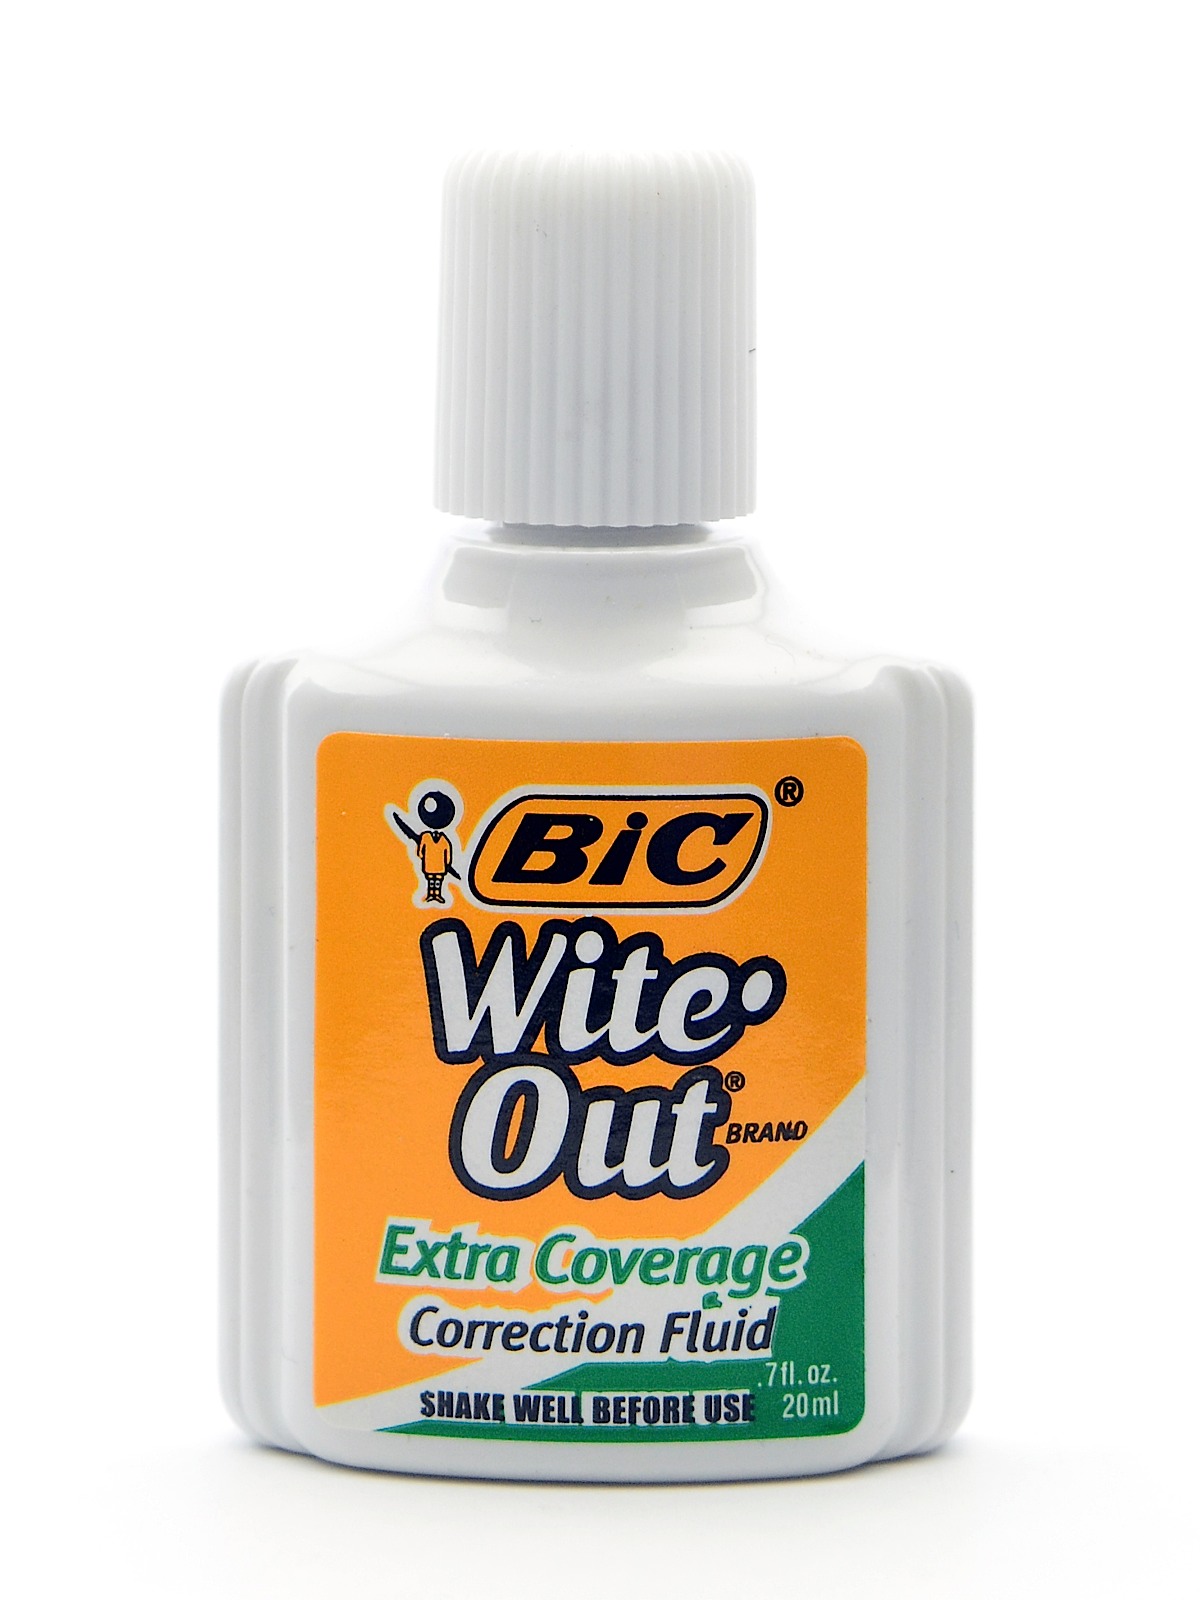 Wite-out Extra Coverage Correction Fluid 0.7 Oz. Bottle